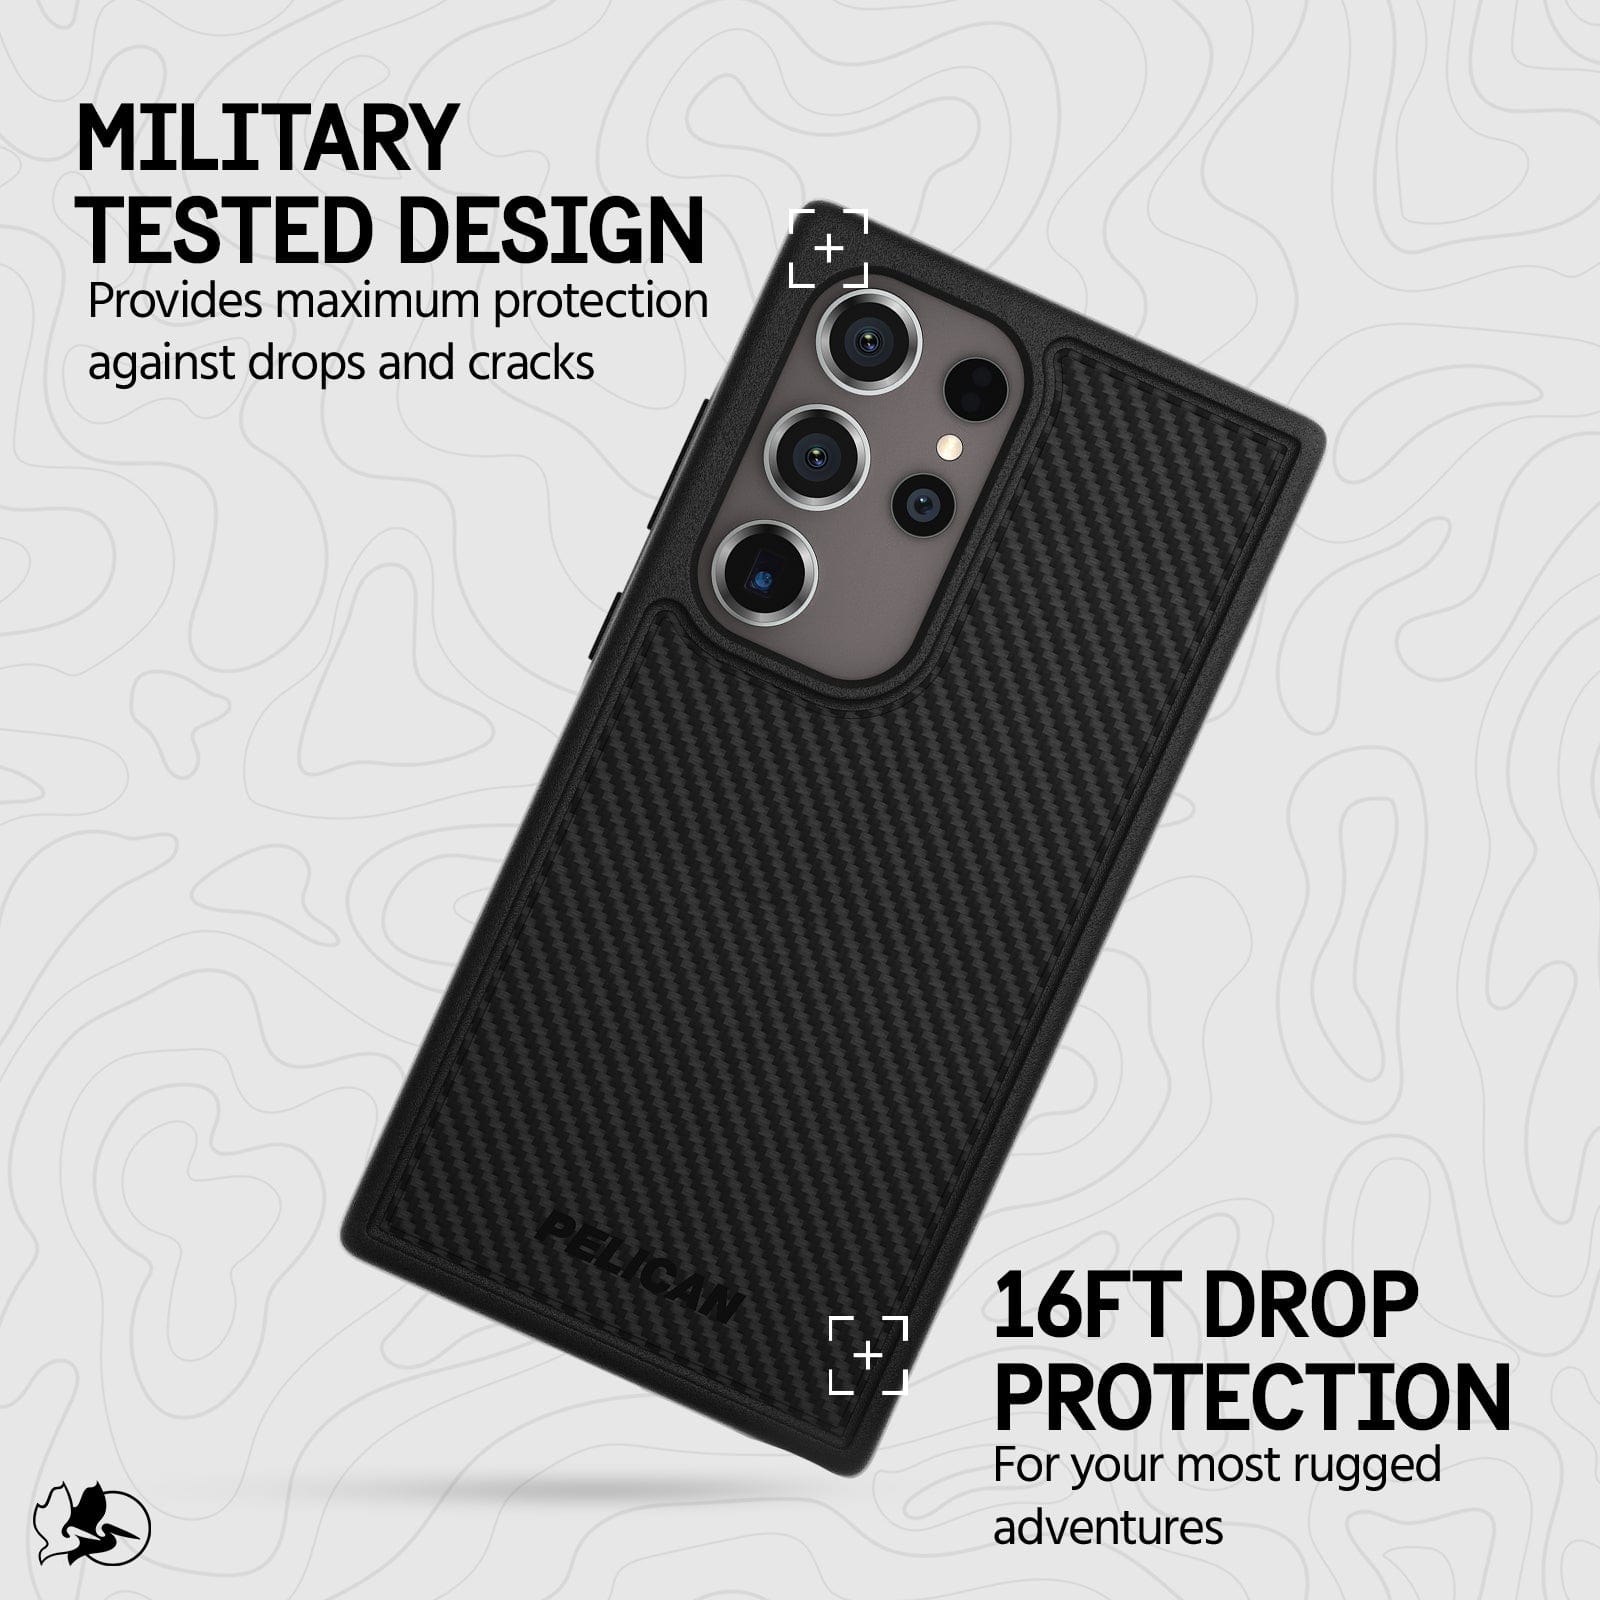 MILITARY TESTED DESIGN PROVIDES MAXIMUM PROTECTION AGAINST DROPS AND CRACKS. 16FT DROP PROTECTION FOR YOUR MOST RUGGED ADVENTURES